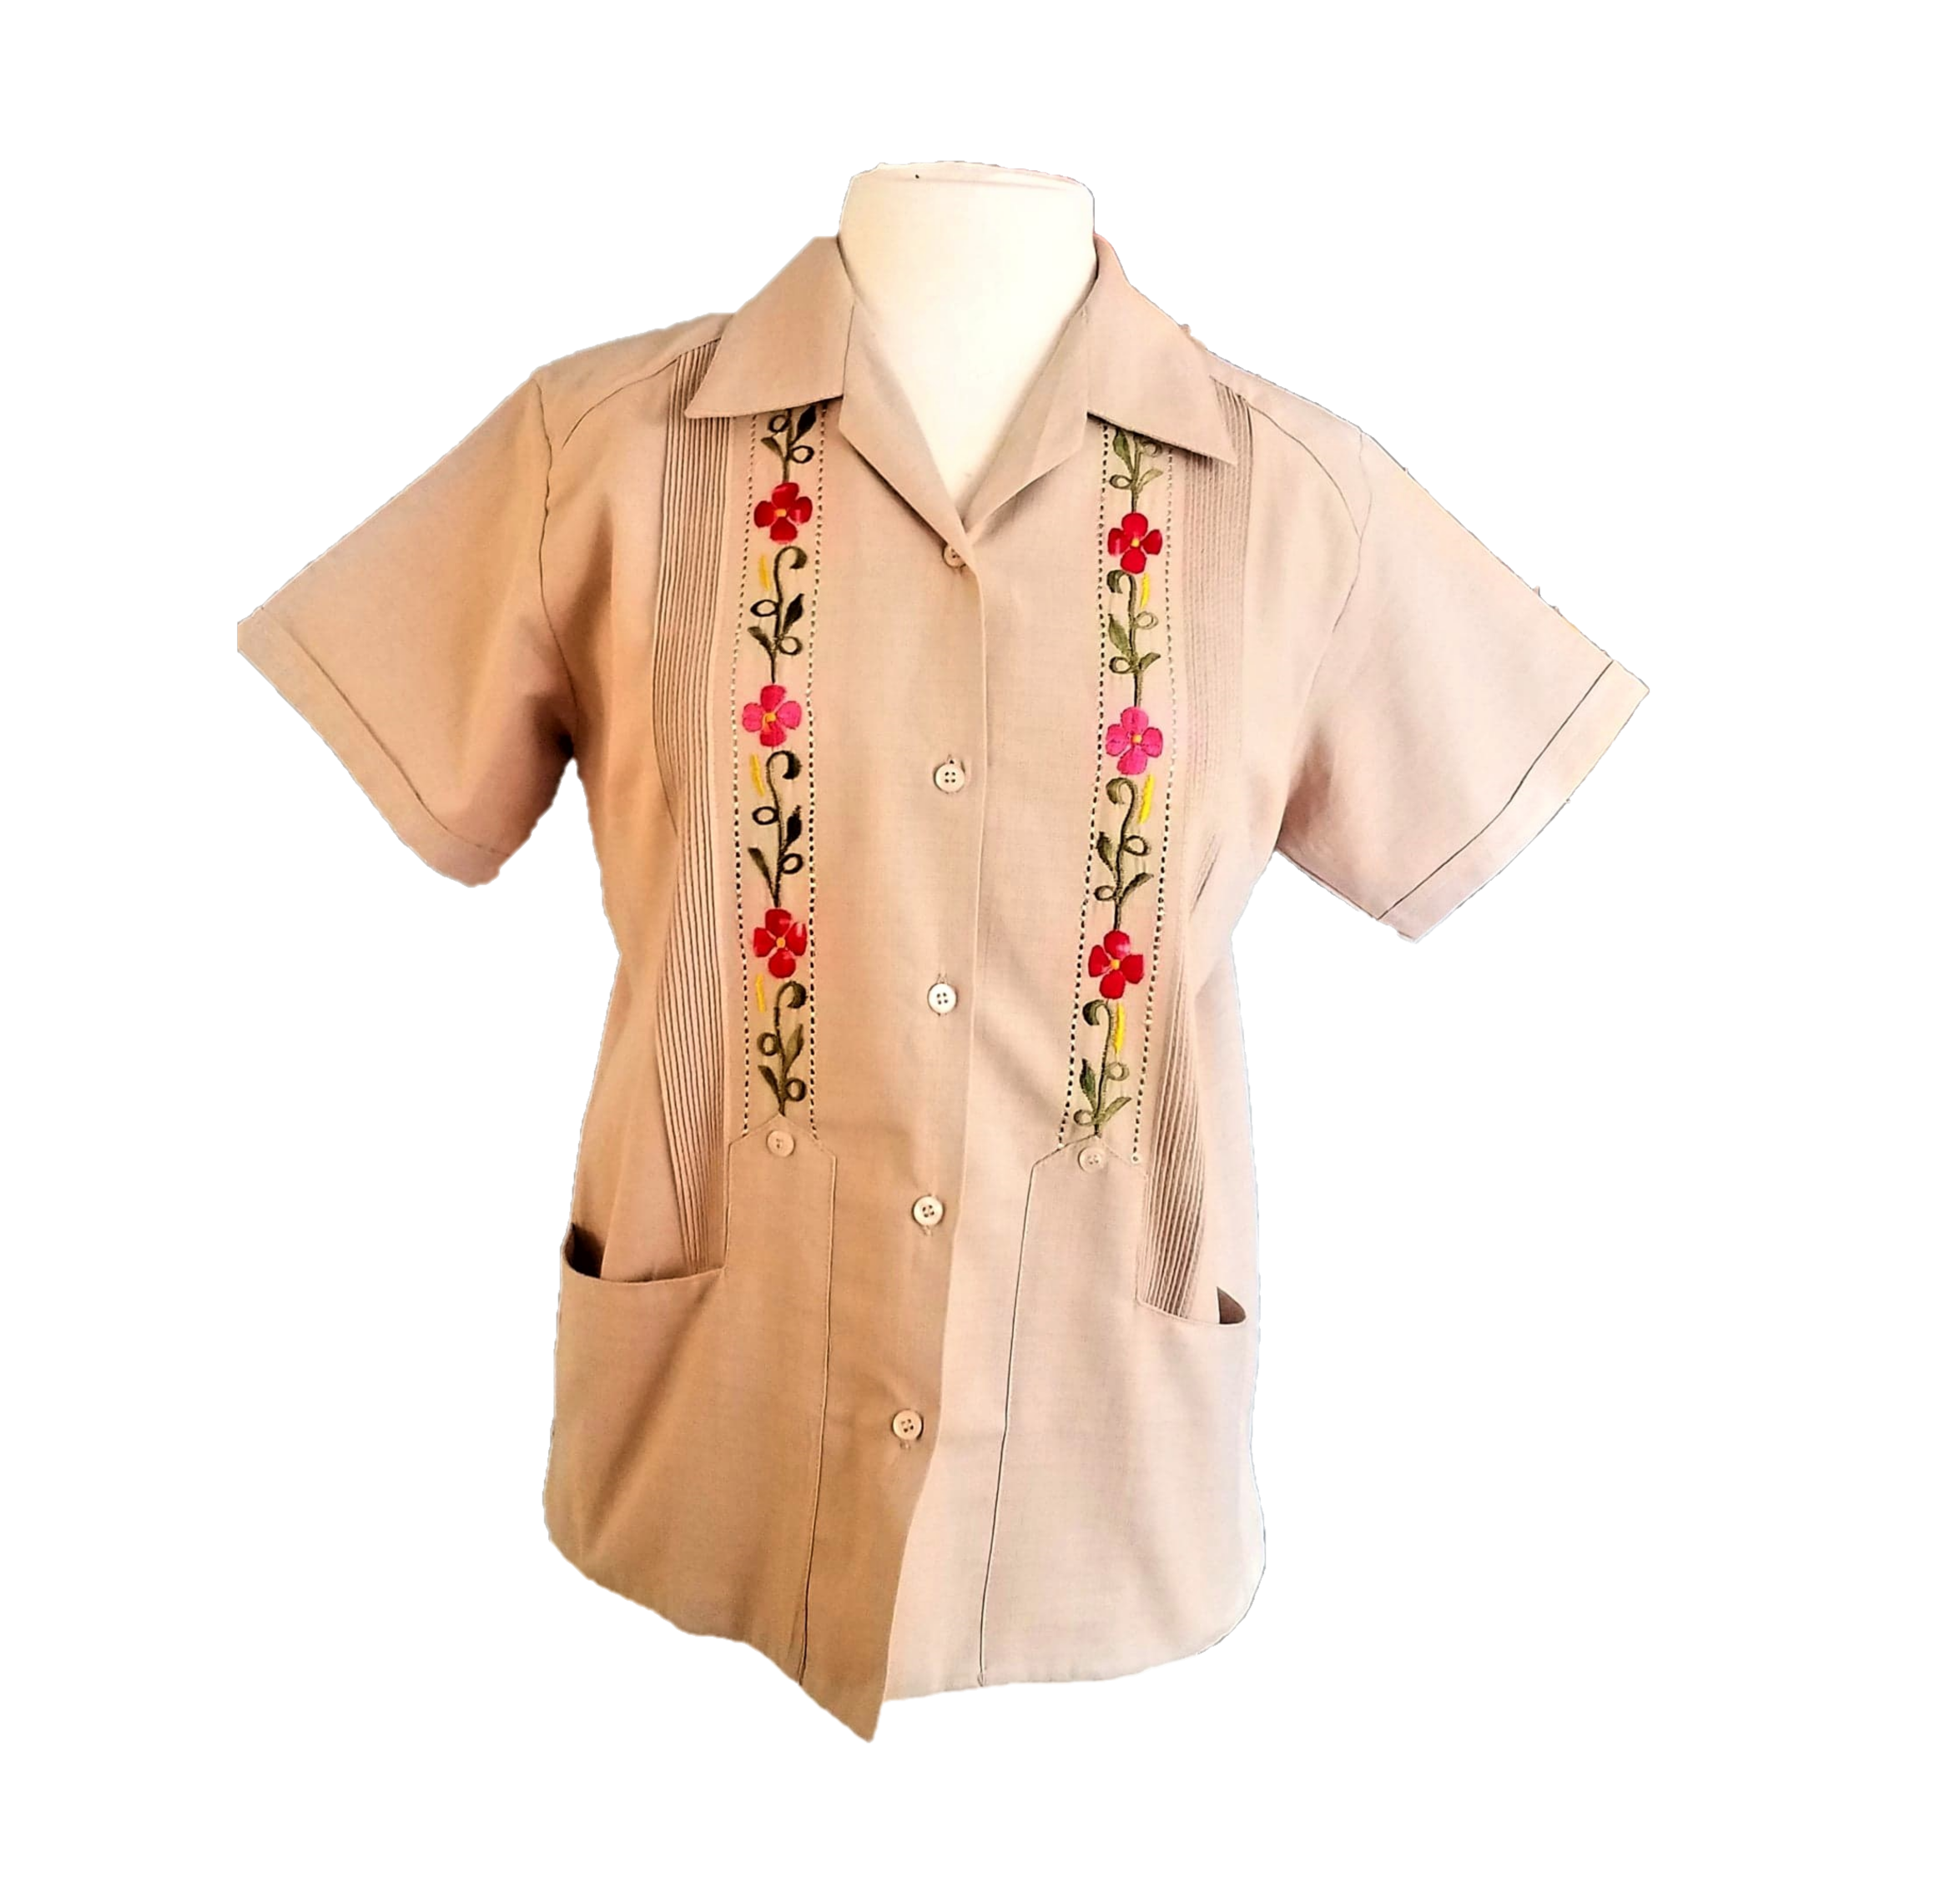 Women's Embroidered Mexican Guayabera Shirt – Rosies Market Y Mas